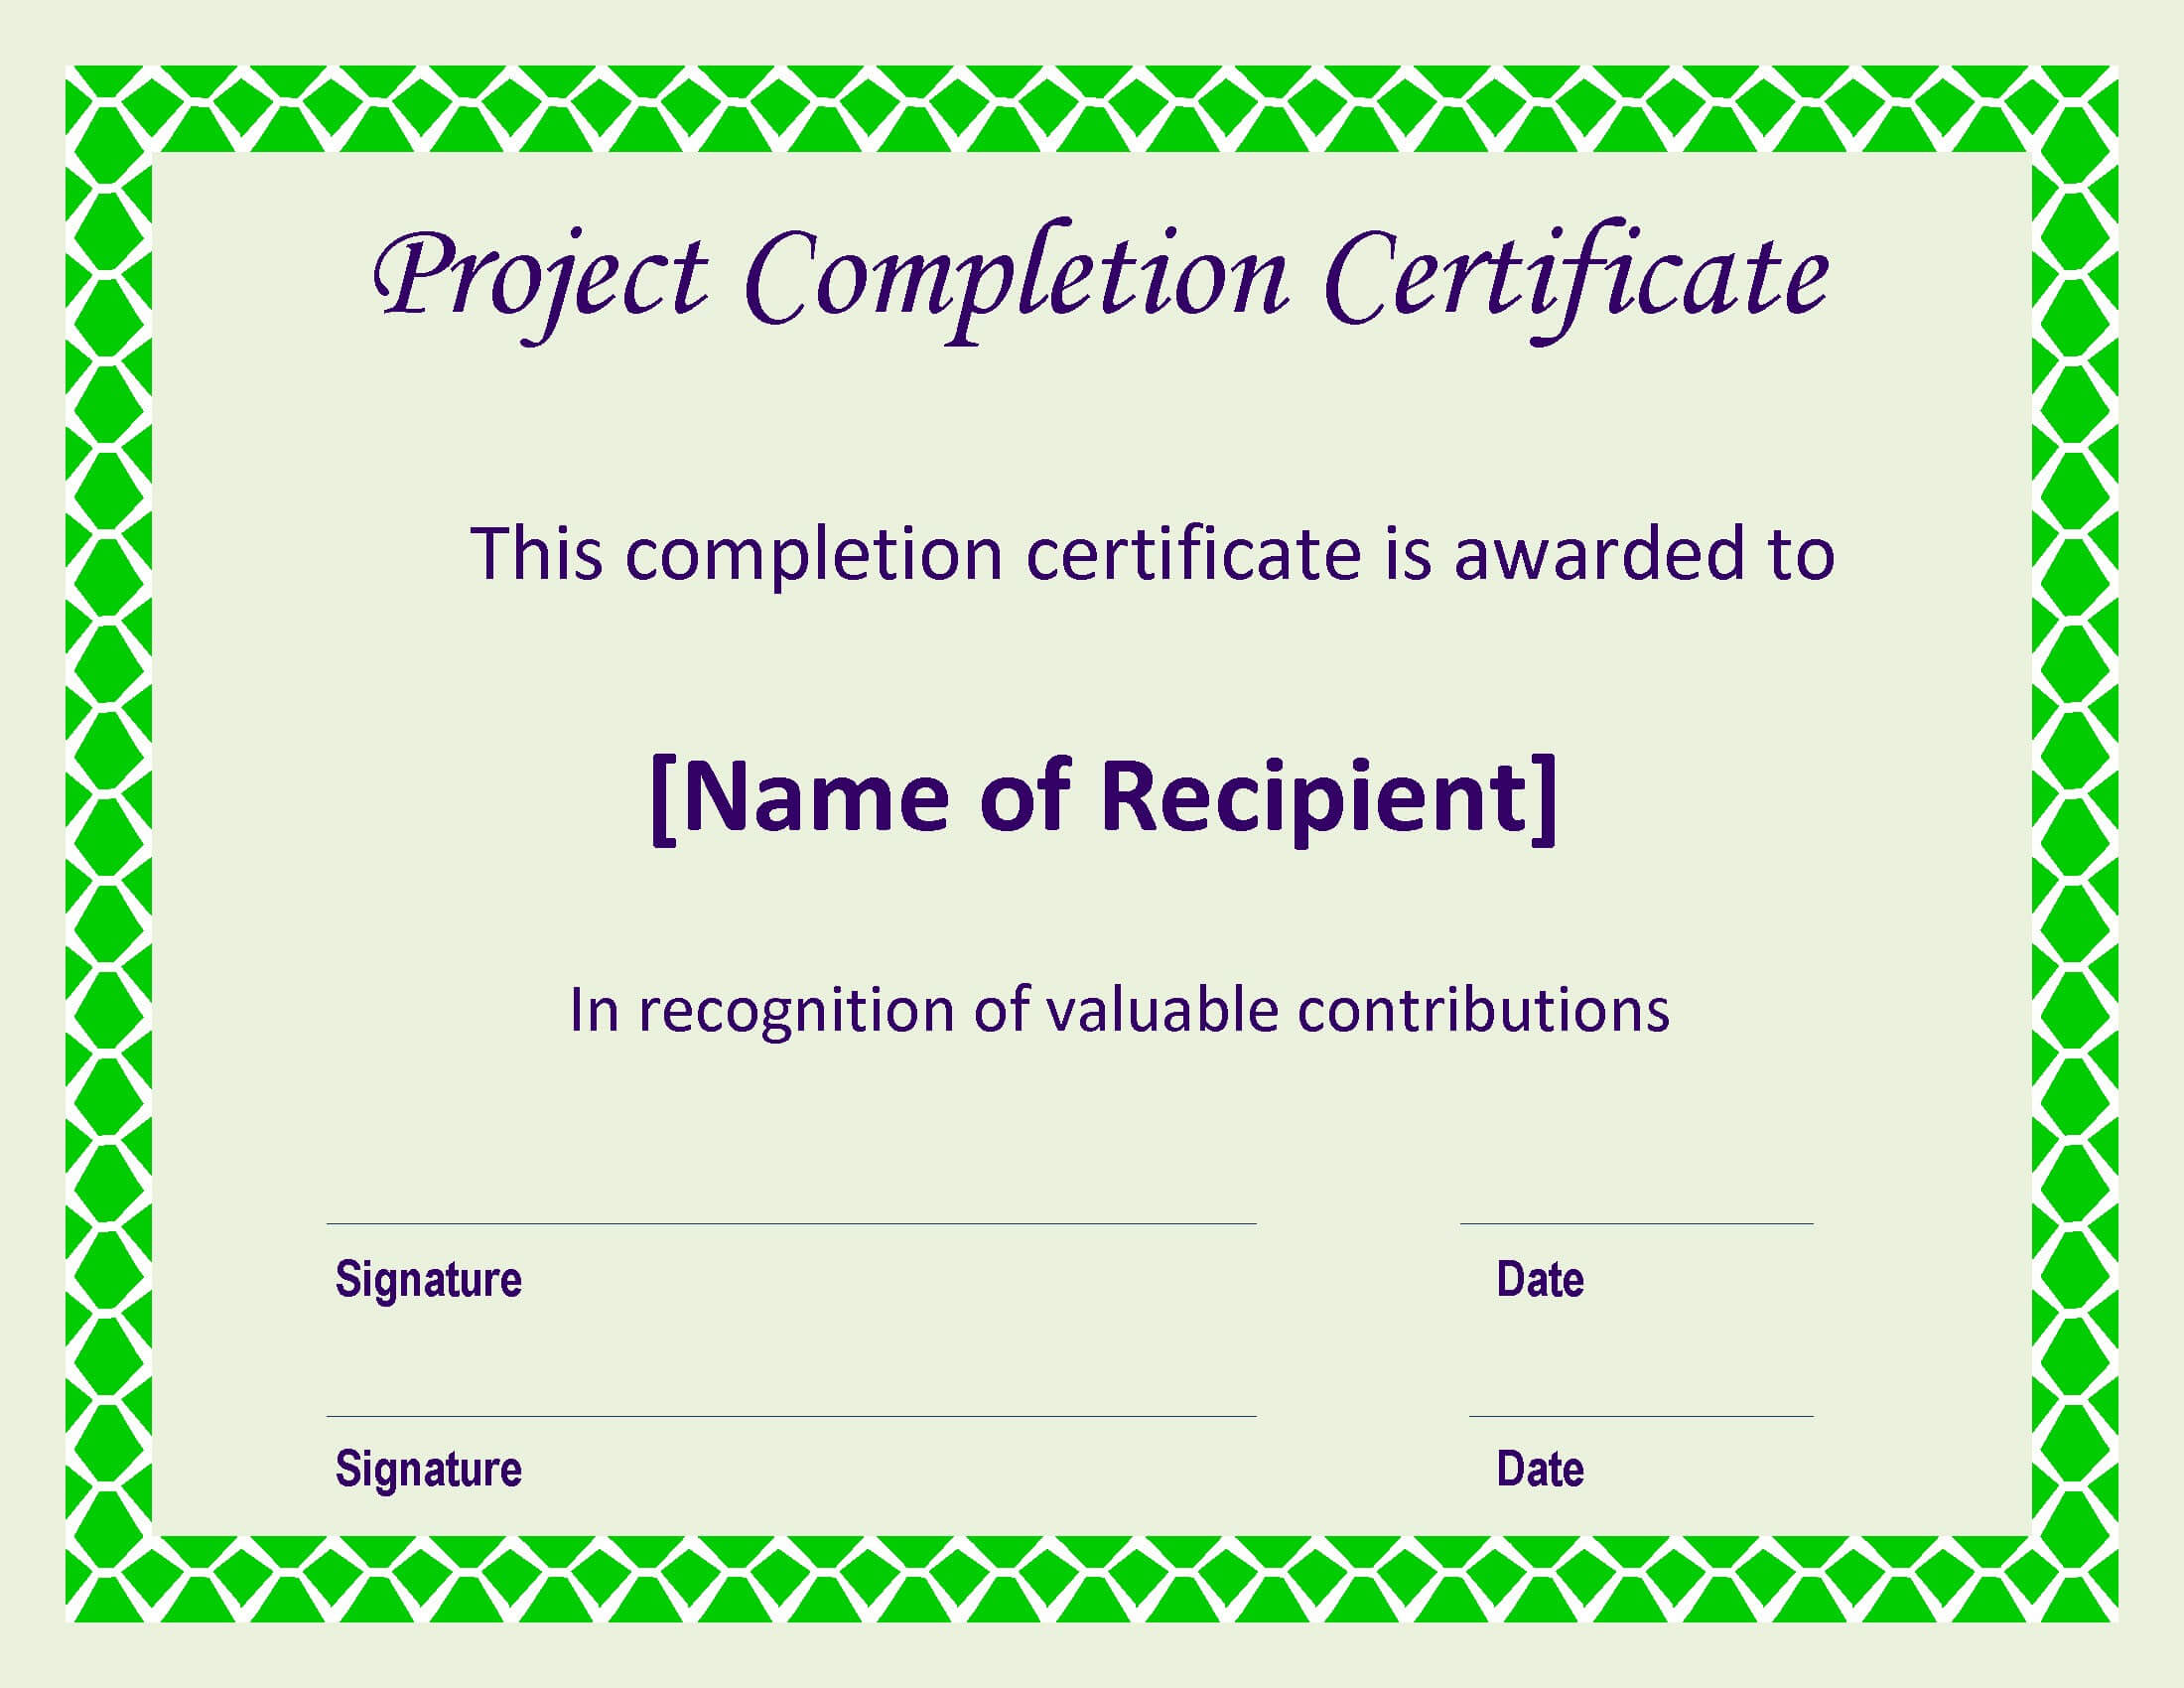 Certificate Sample For Project - Calep.midnightpig.co In Certificate Template For Project Completion